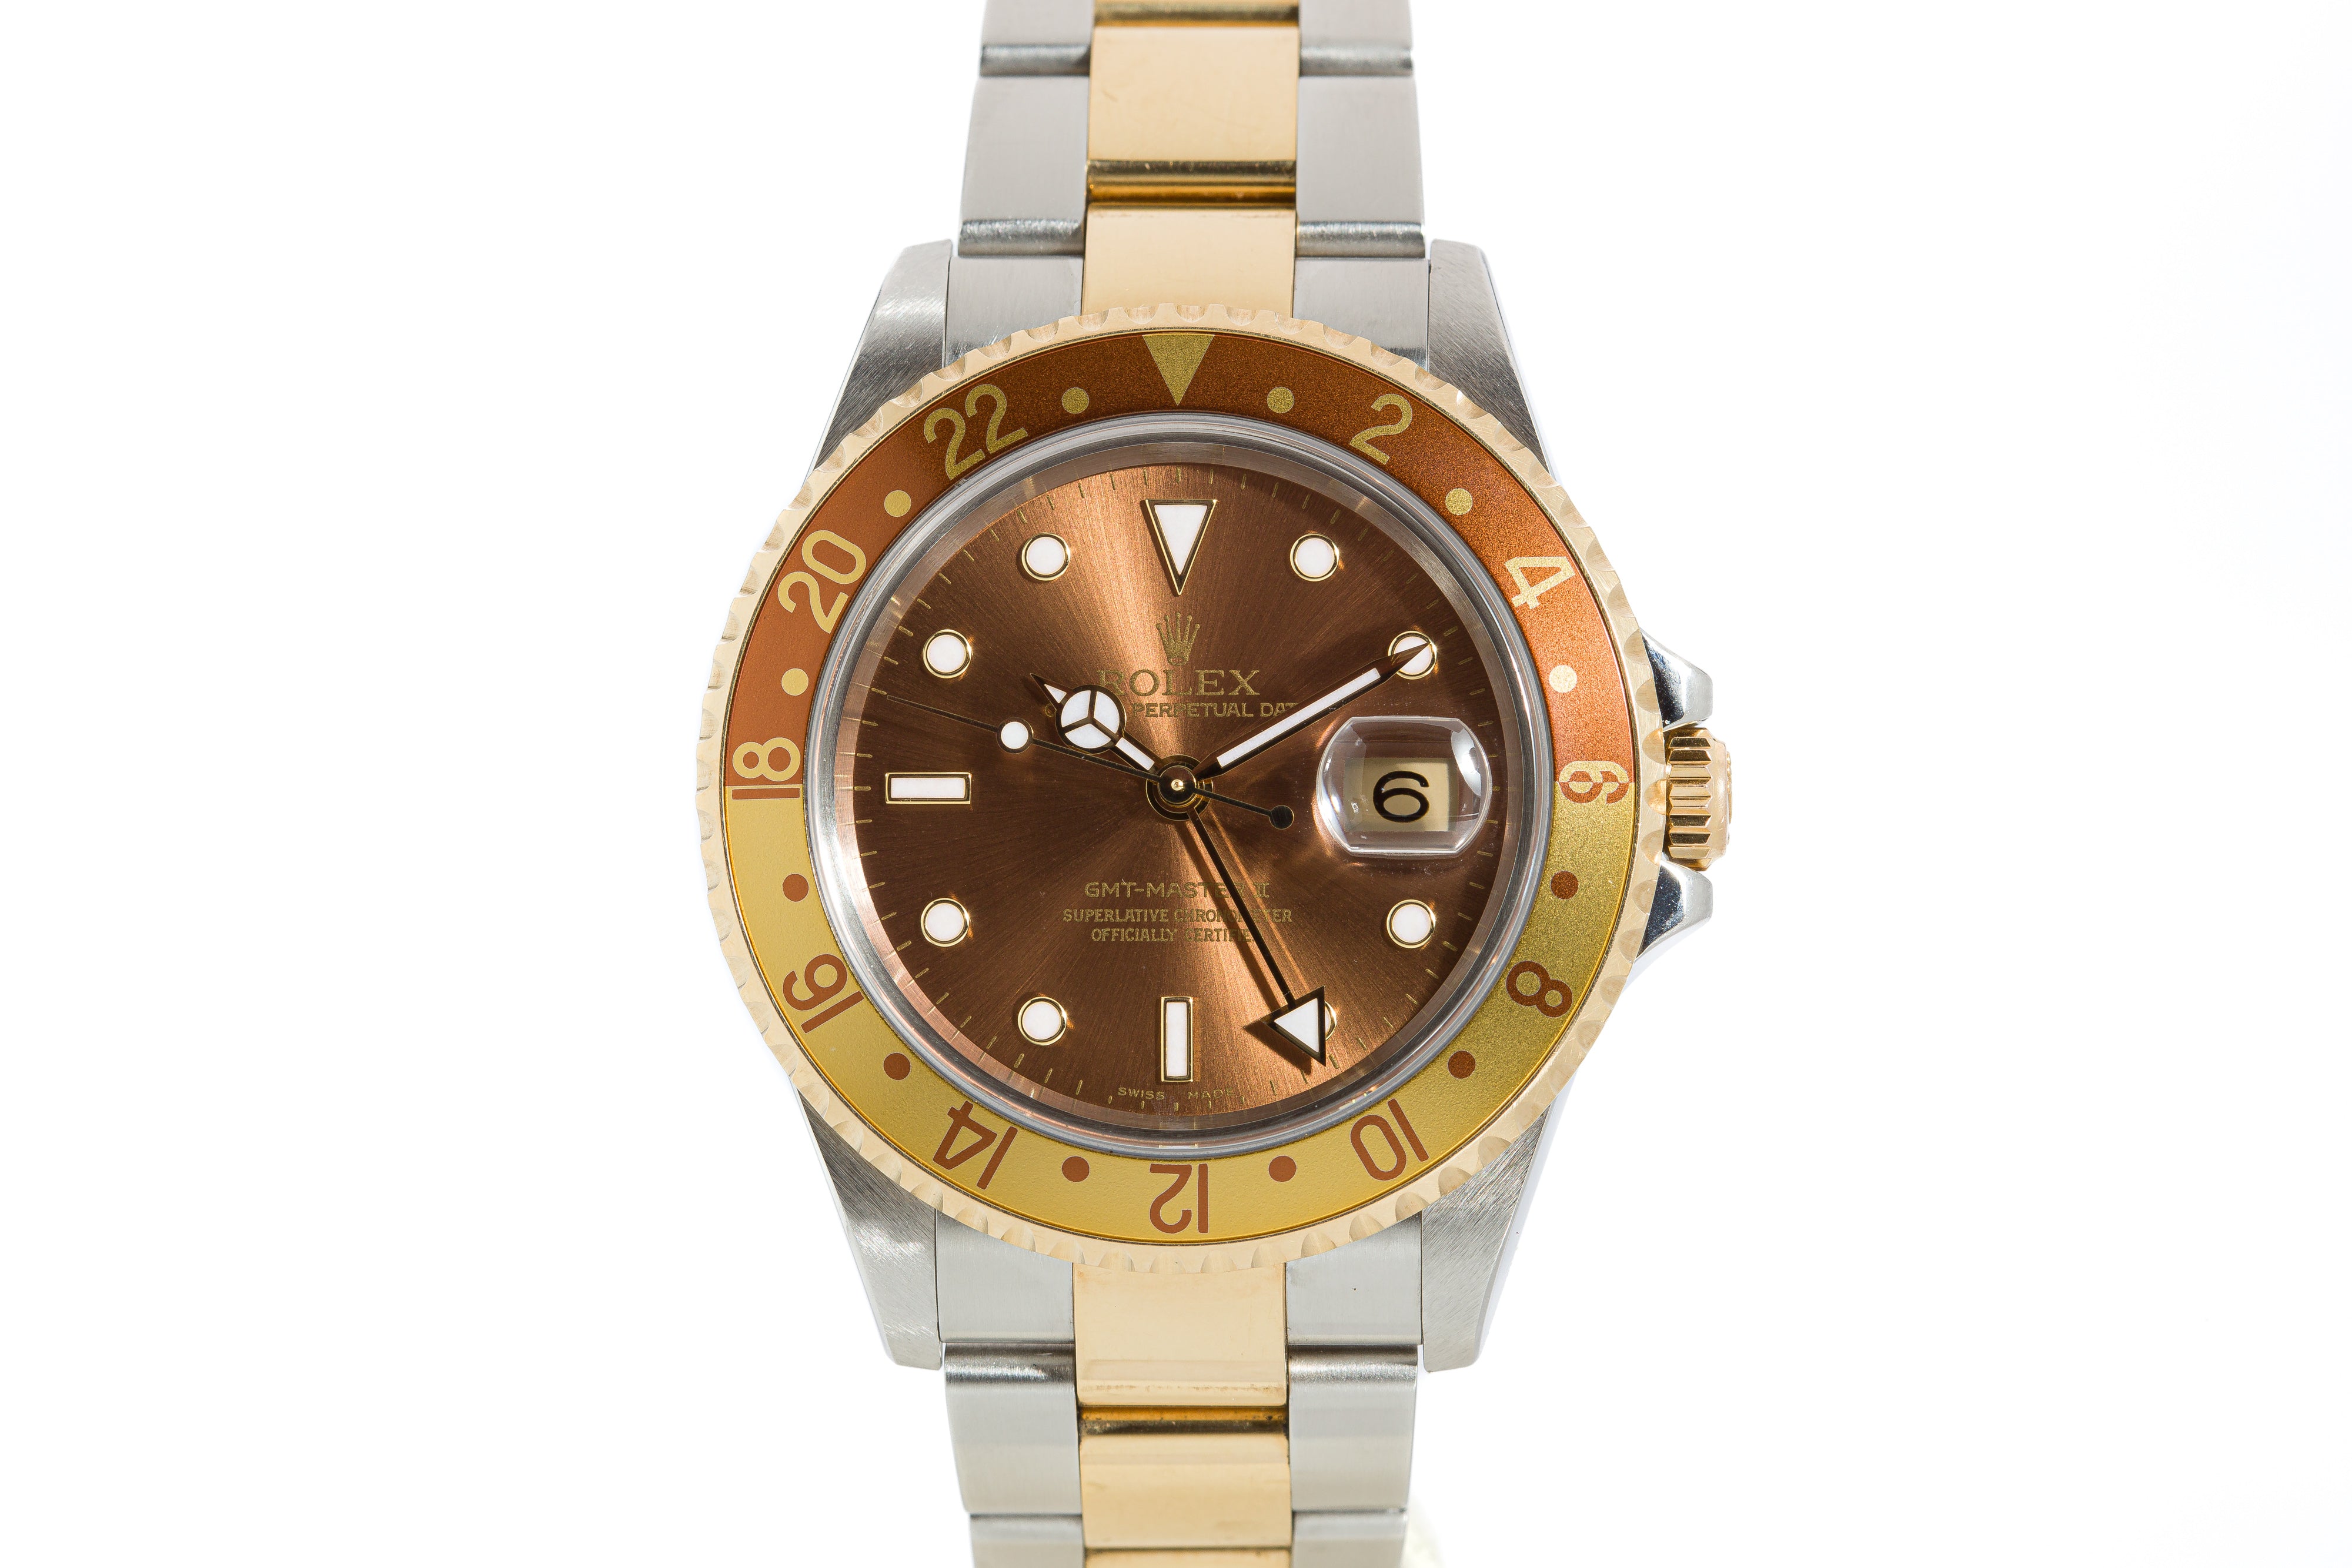 HQ Milton - 2005 16713 "Root Beer" 18k/St GMT Master II Brown Dial, Inventory #A5076, For Sale